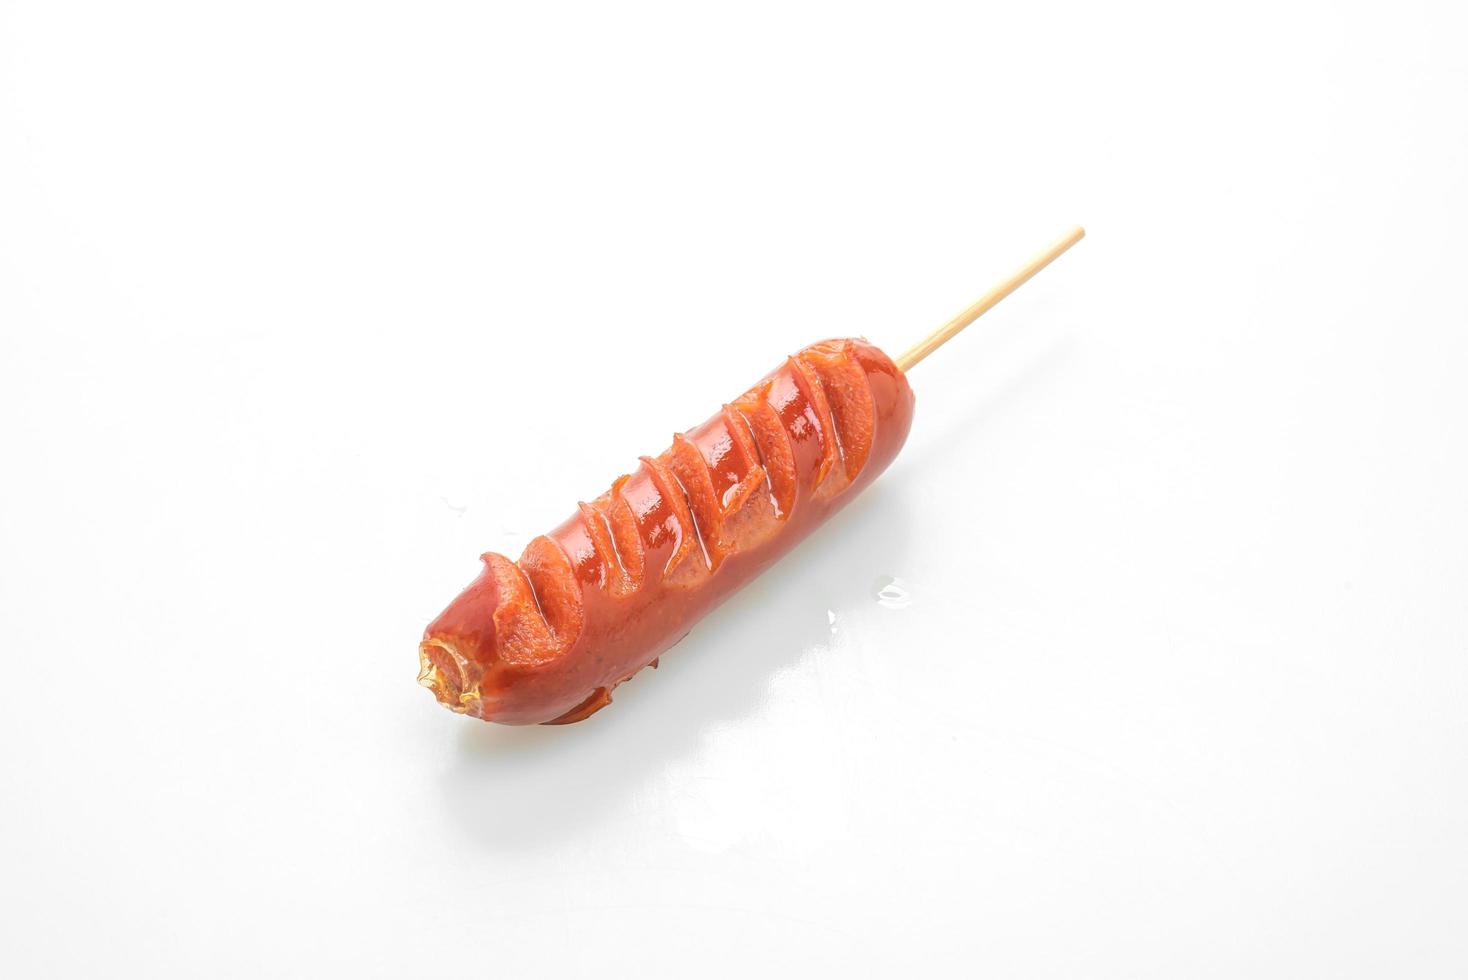 Fried sausage skewer isolated on white background photo